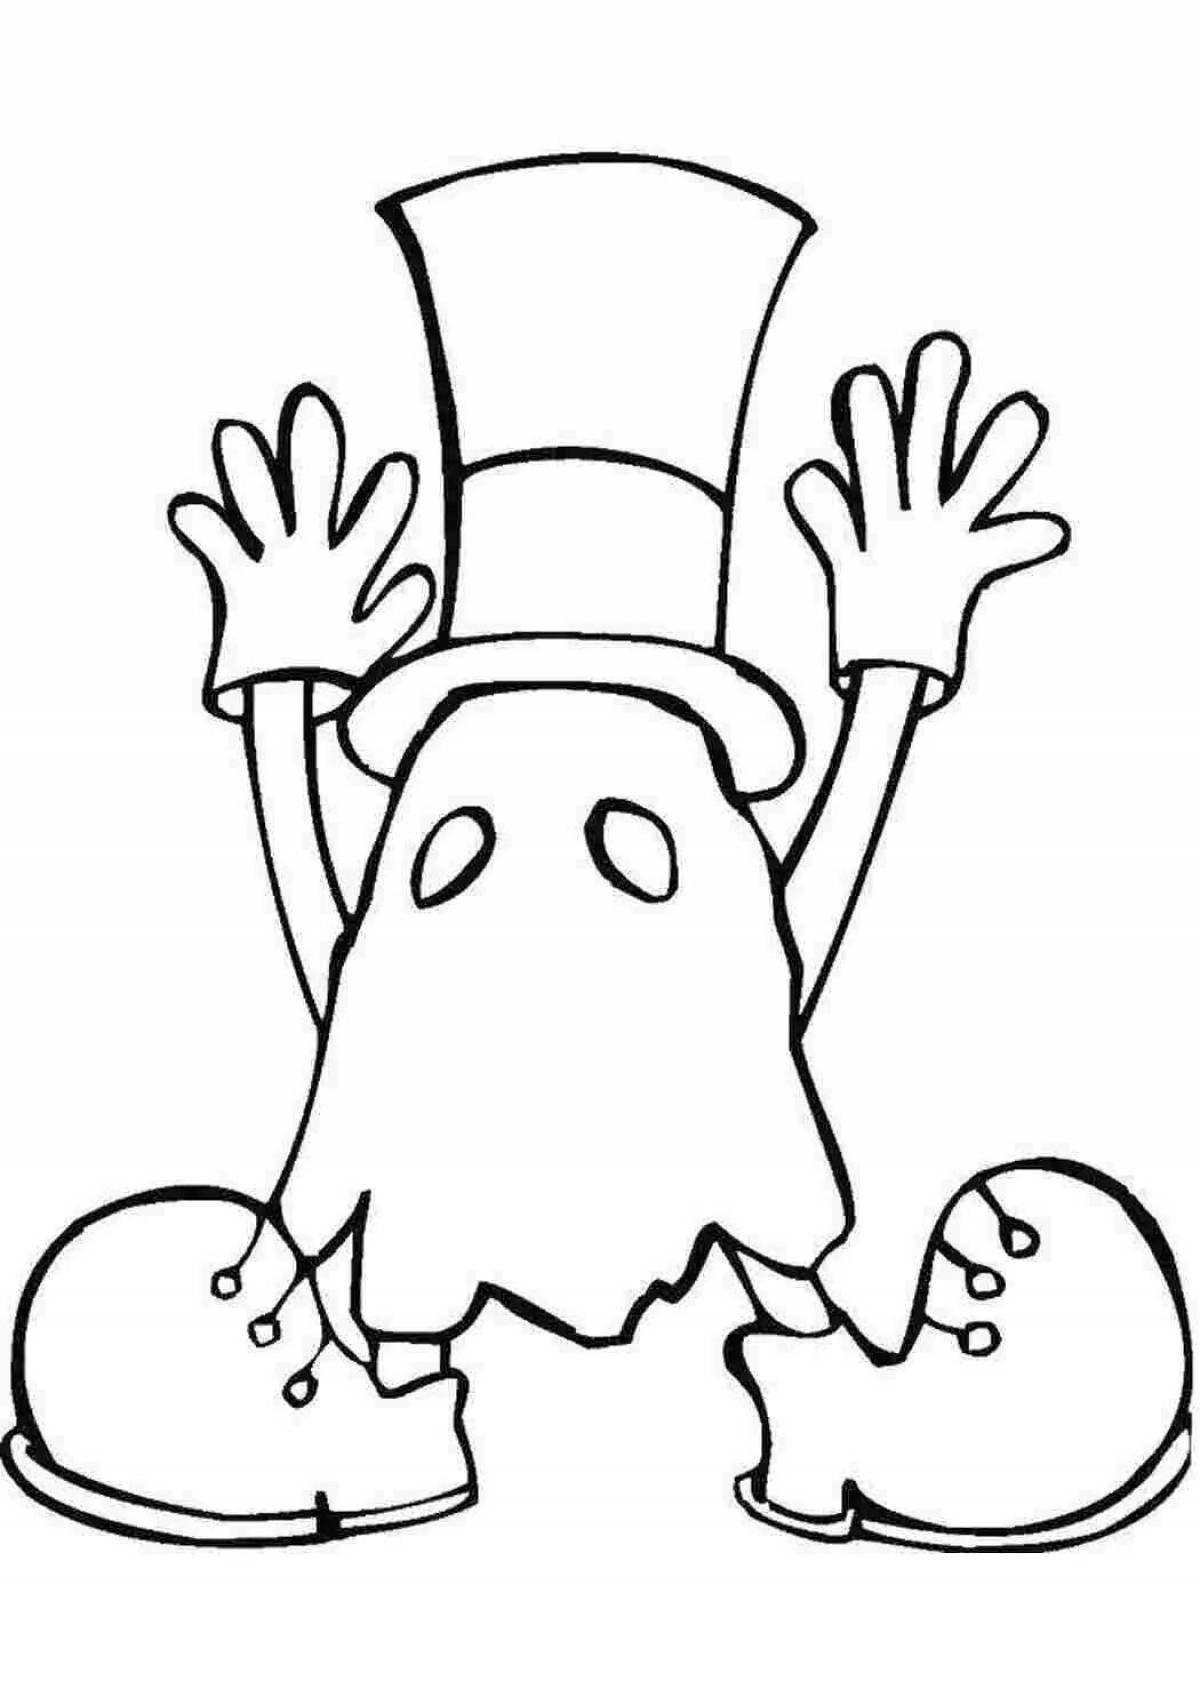 Ambiguous ghost coloring for kids